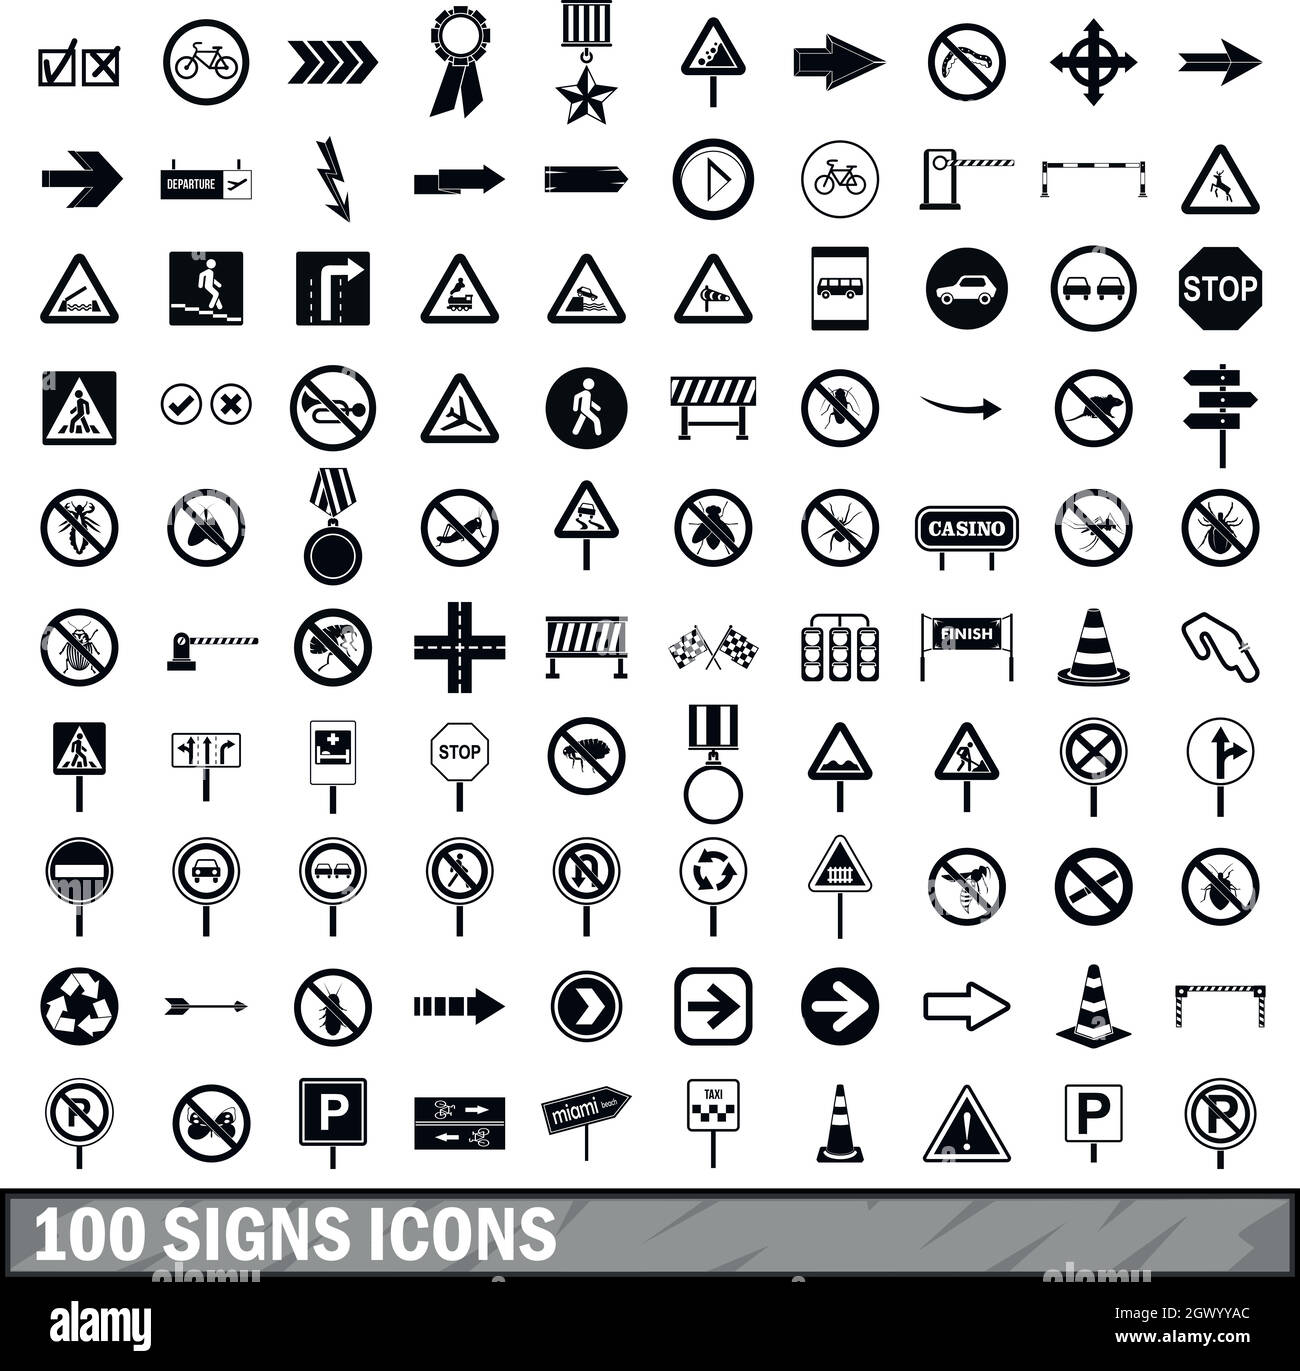 100 road signs icons set in simple style Stock Vector